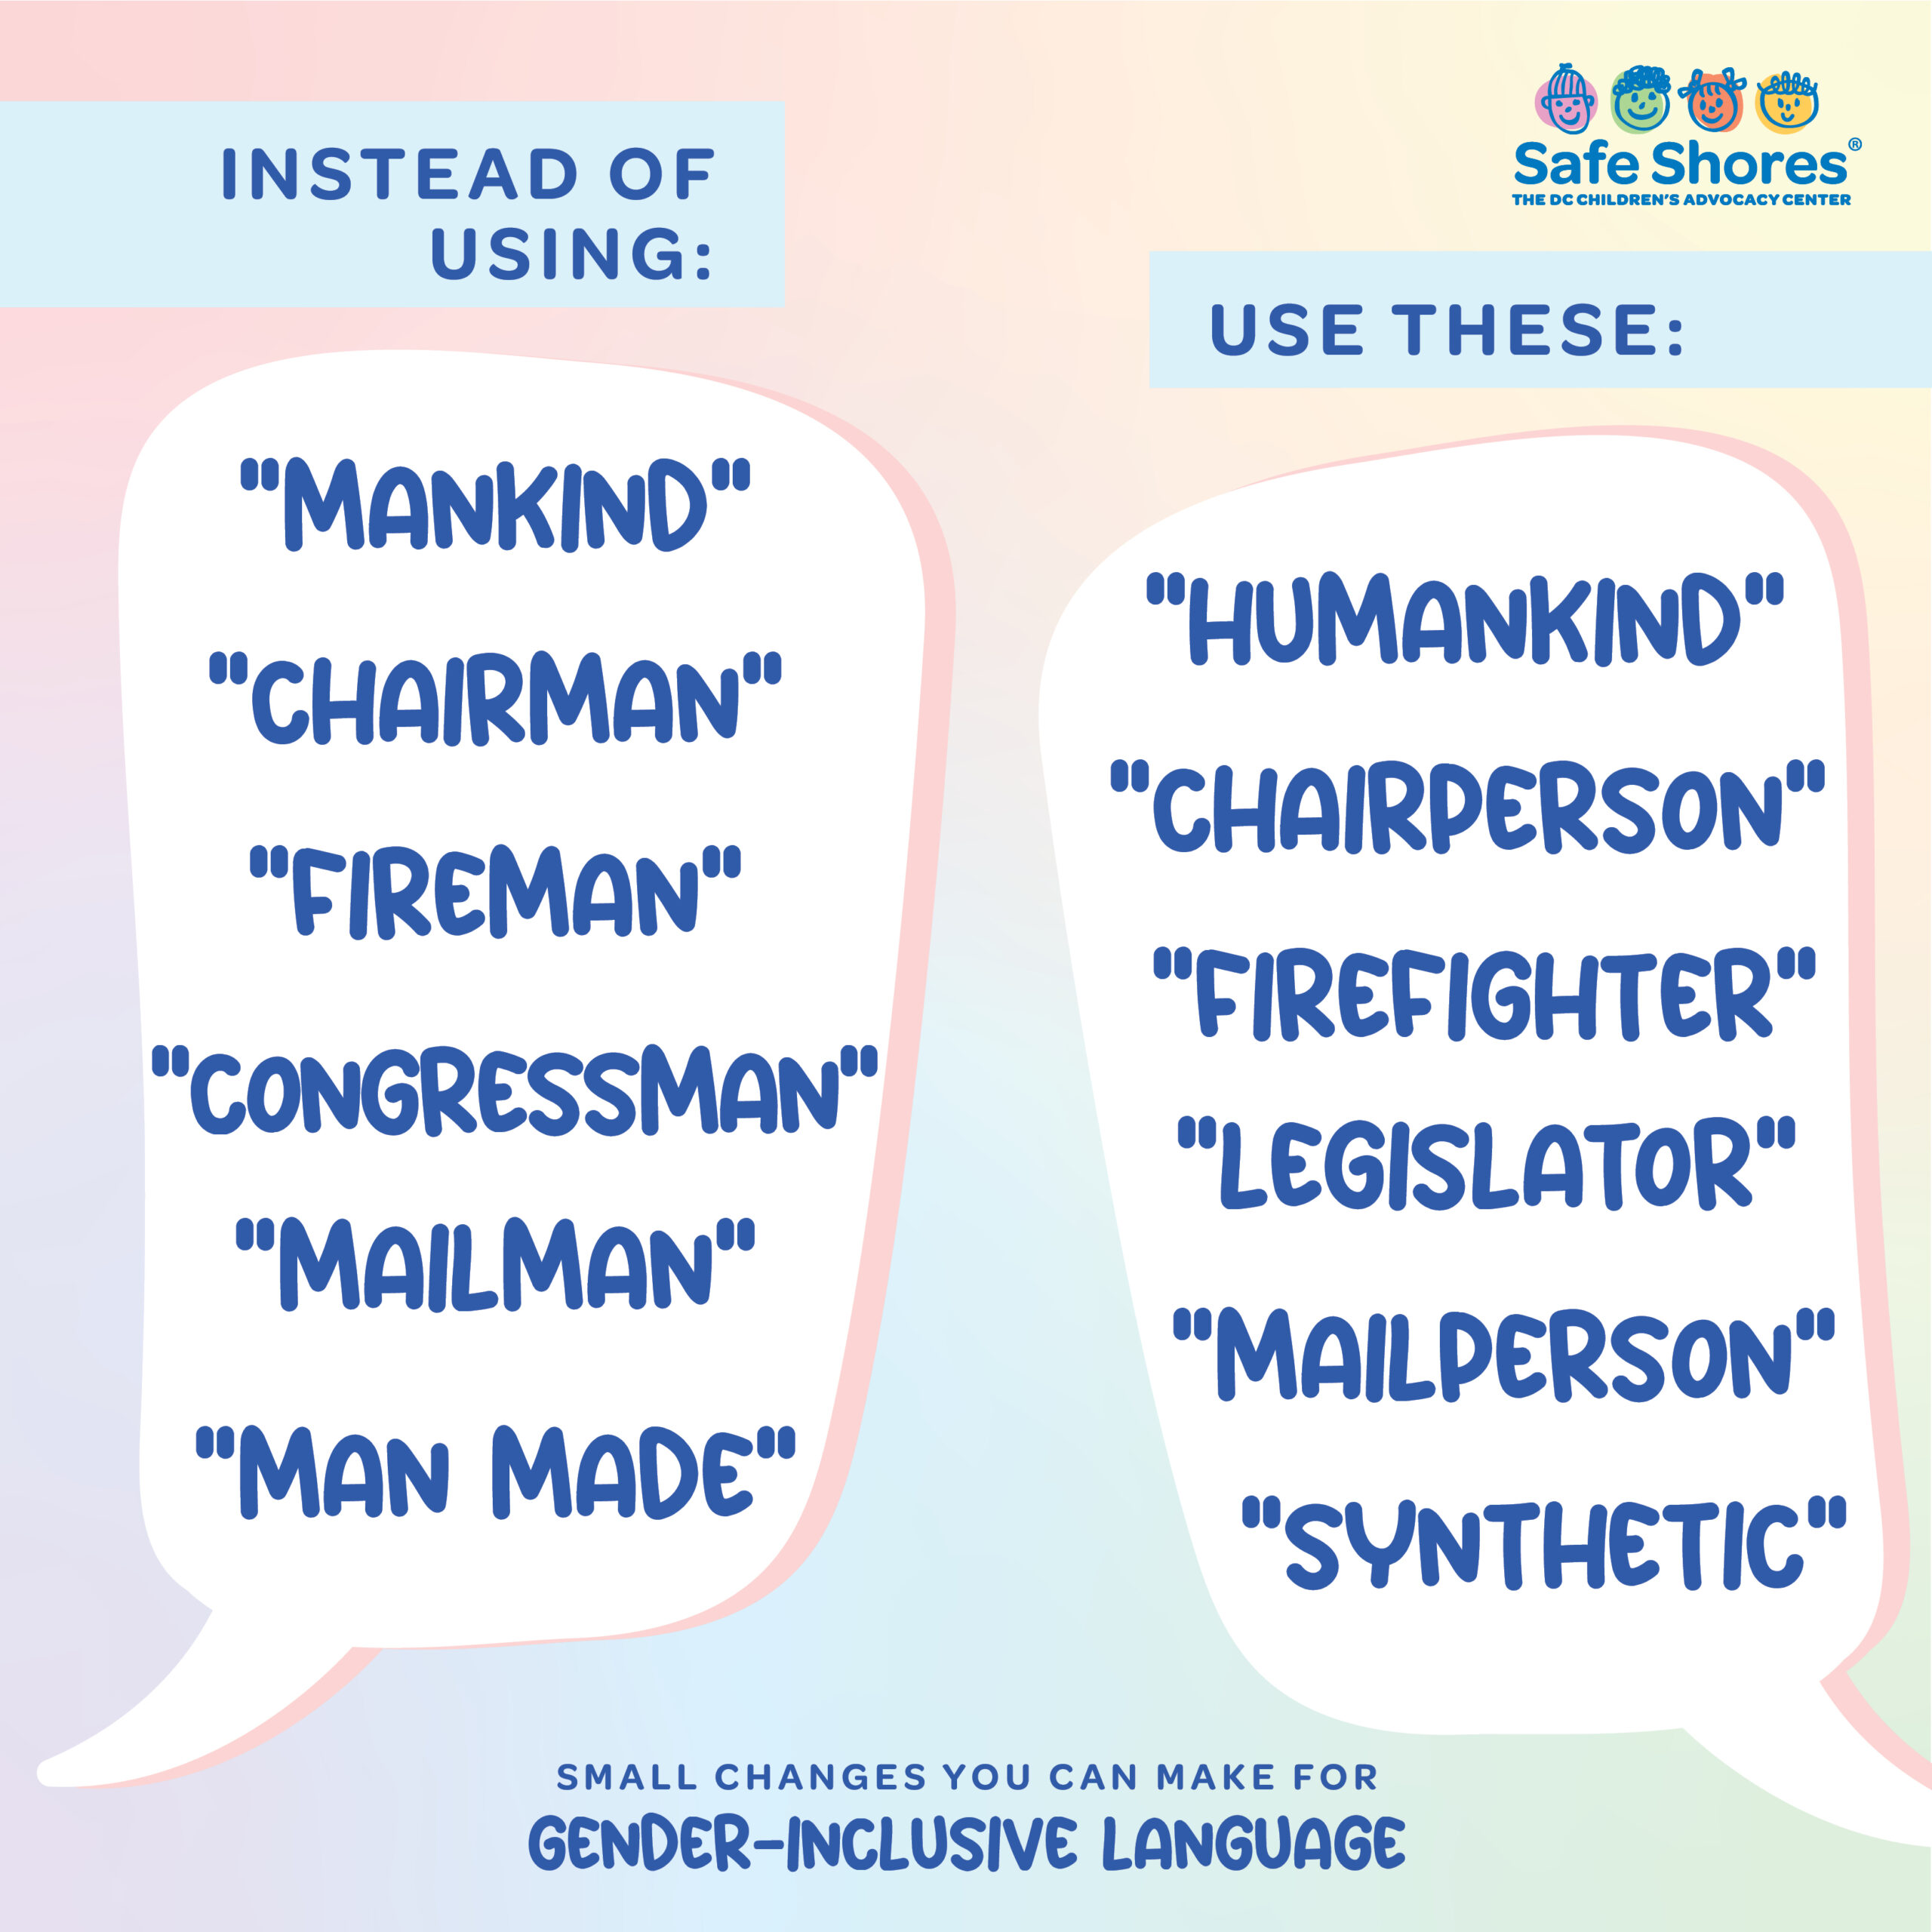 This rainbow image gives easy gender-inclusive ways of saying traditional names of jobs and titles. Mankind becomes humankind. Chairman becomes chairperson. Fireman becomes firefighter. Congressman becomes legislator. Mailman becomes mailperson. Man made becomes synthetic.